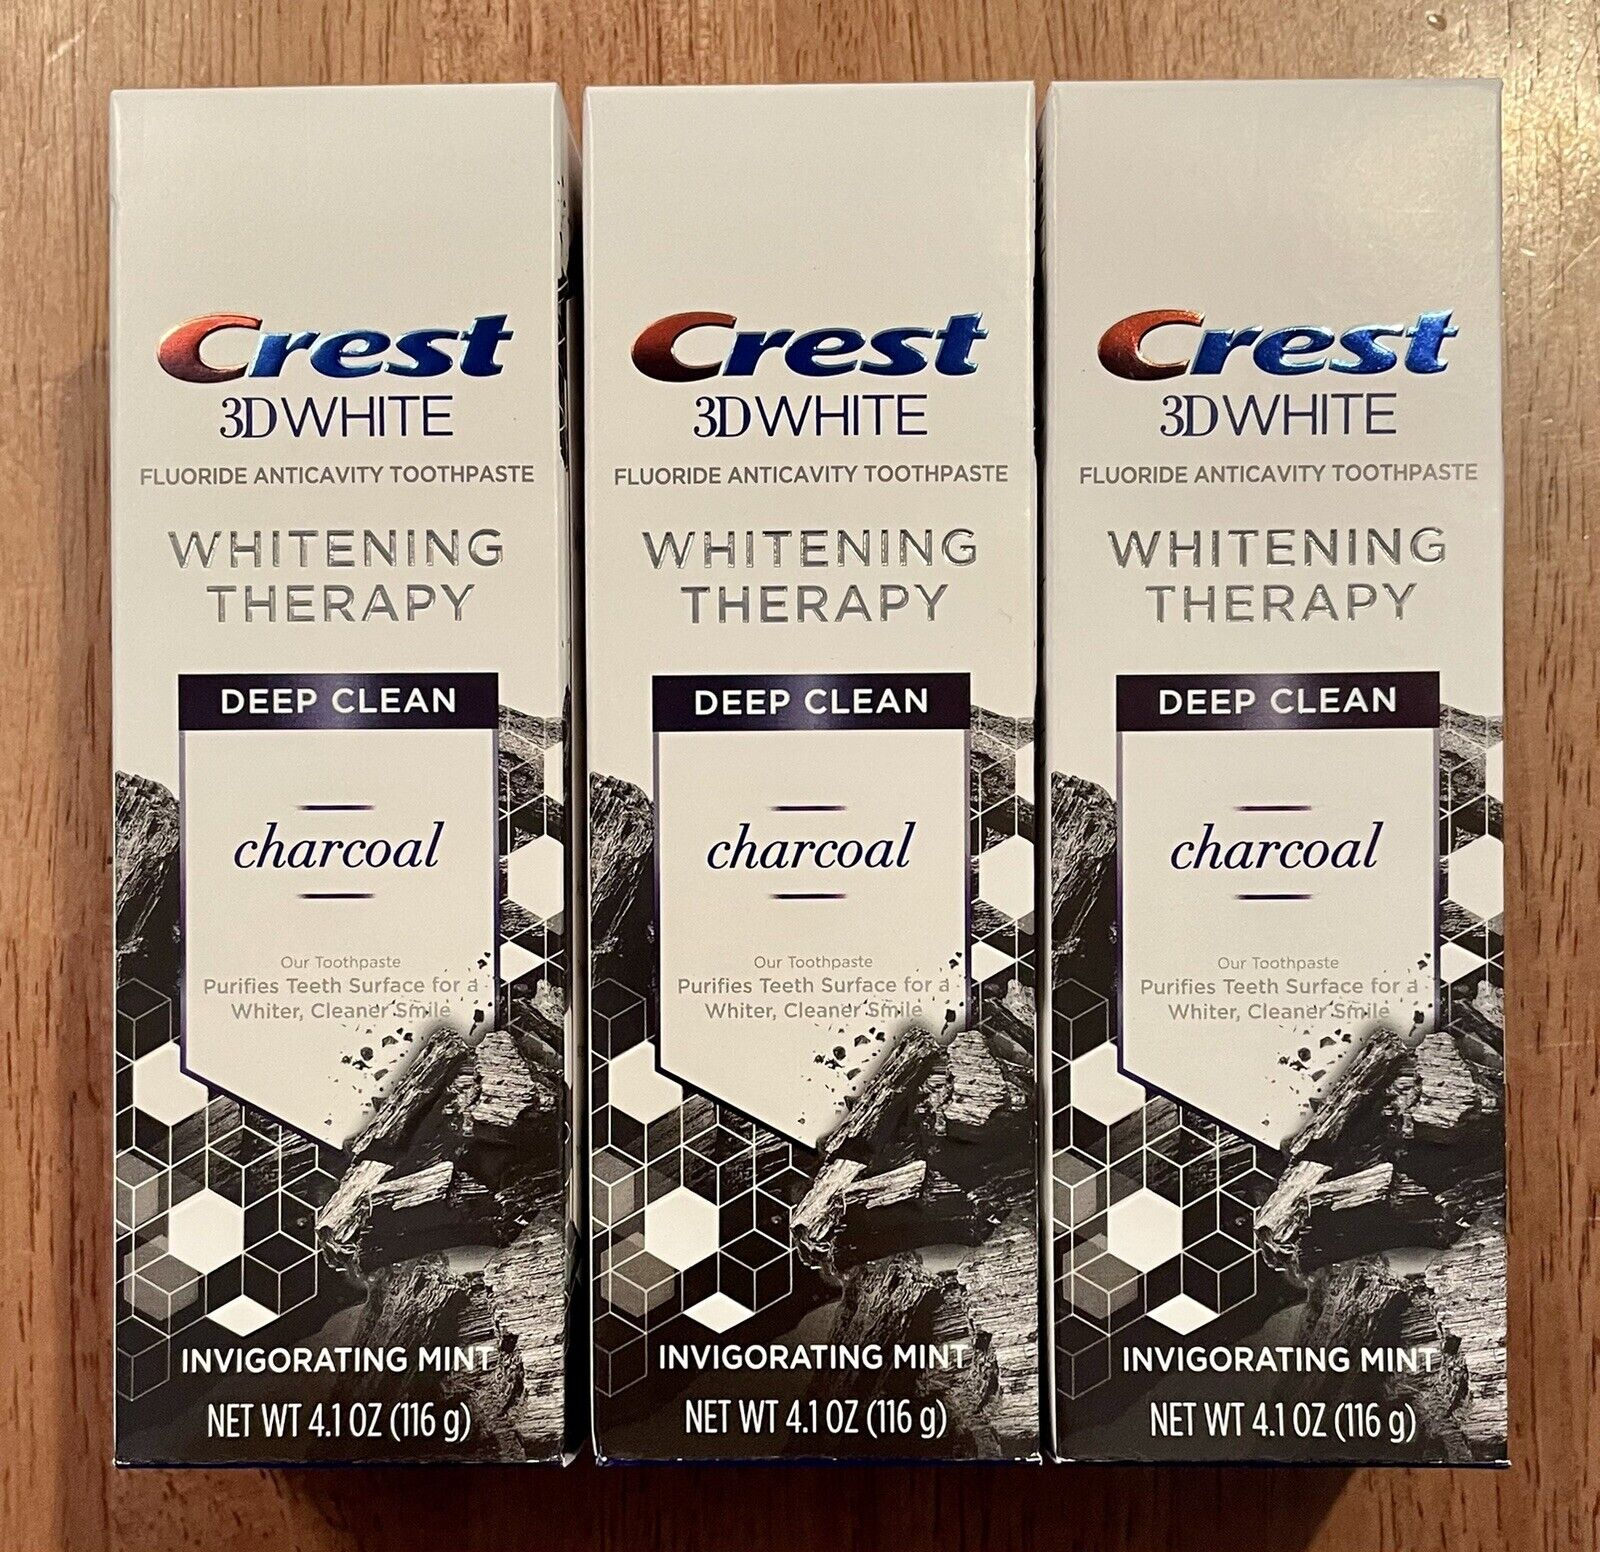 LOT of 3x Crest 3D White DEEP Charcoal Invigorat Whitening Directly managed store Limited time cheap sale CLEAN